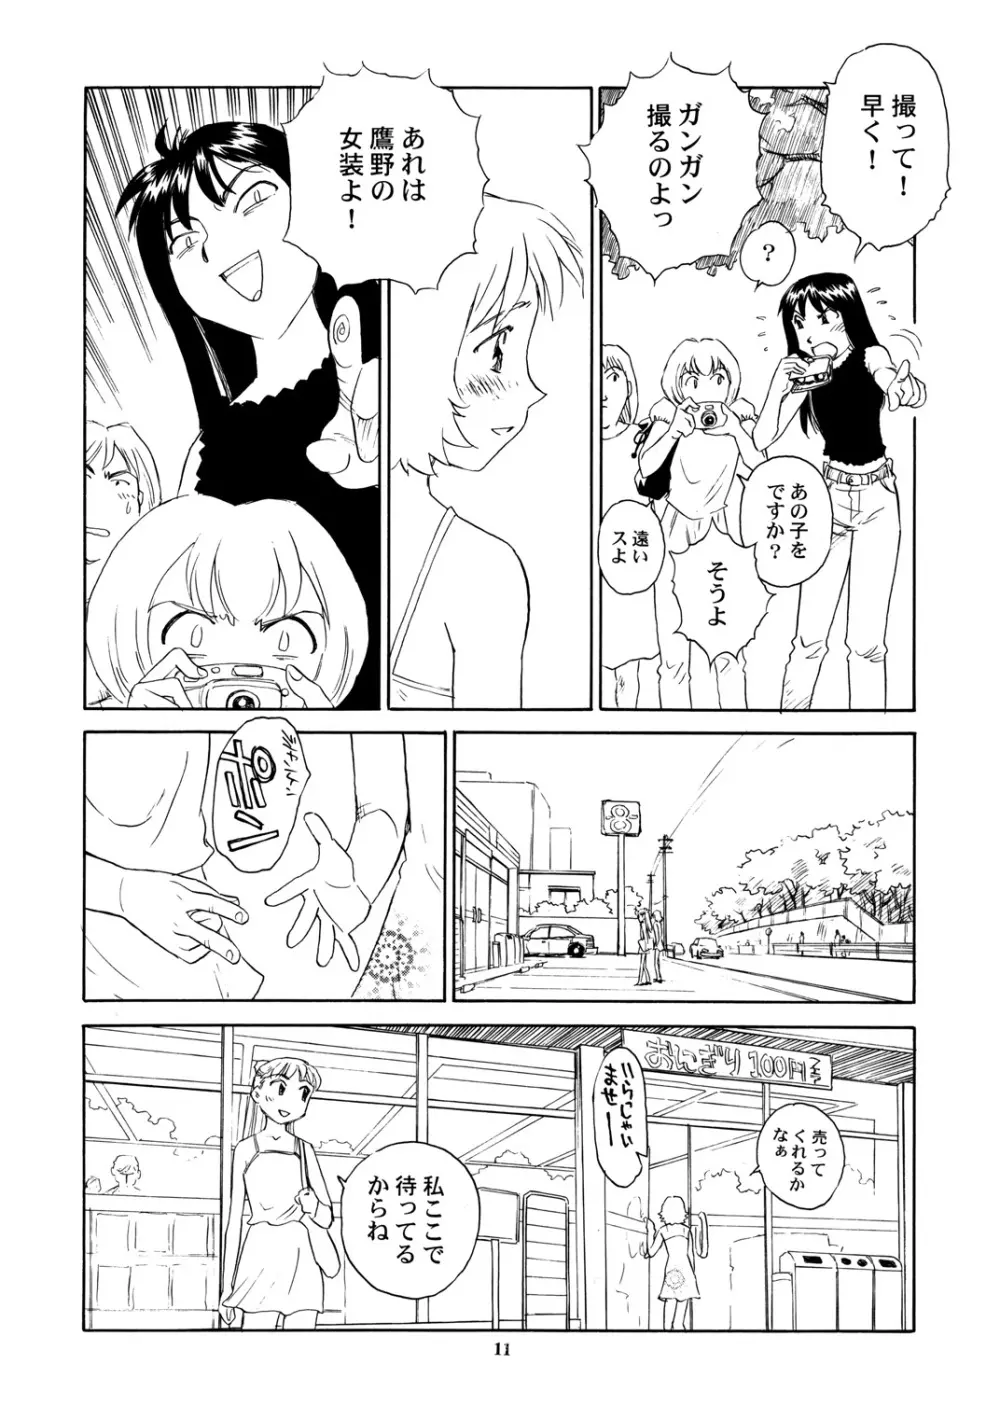 8 miles high vol.8 Page.12